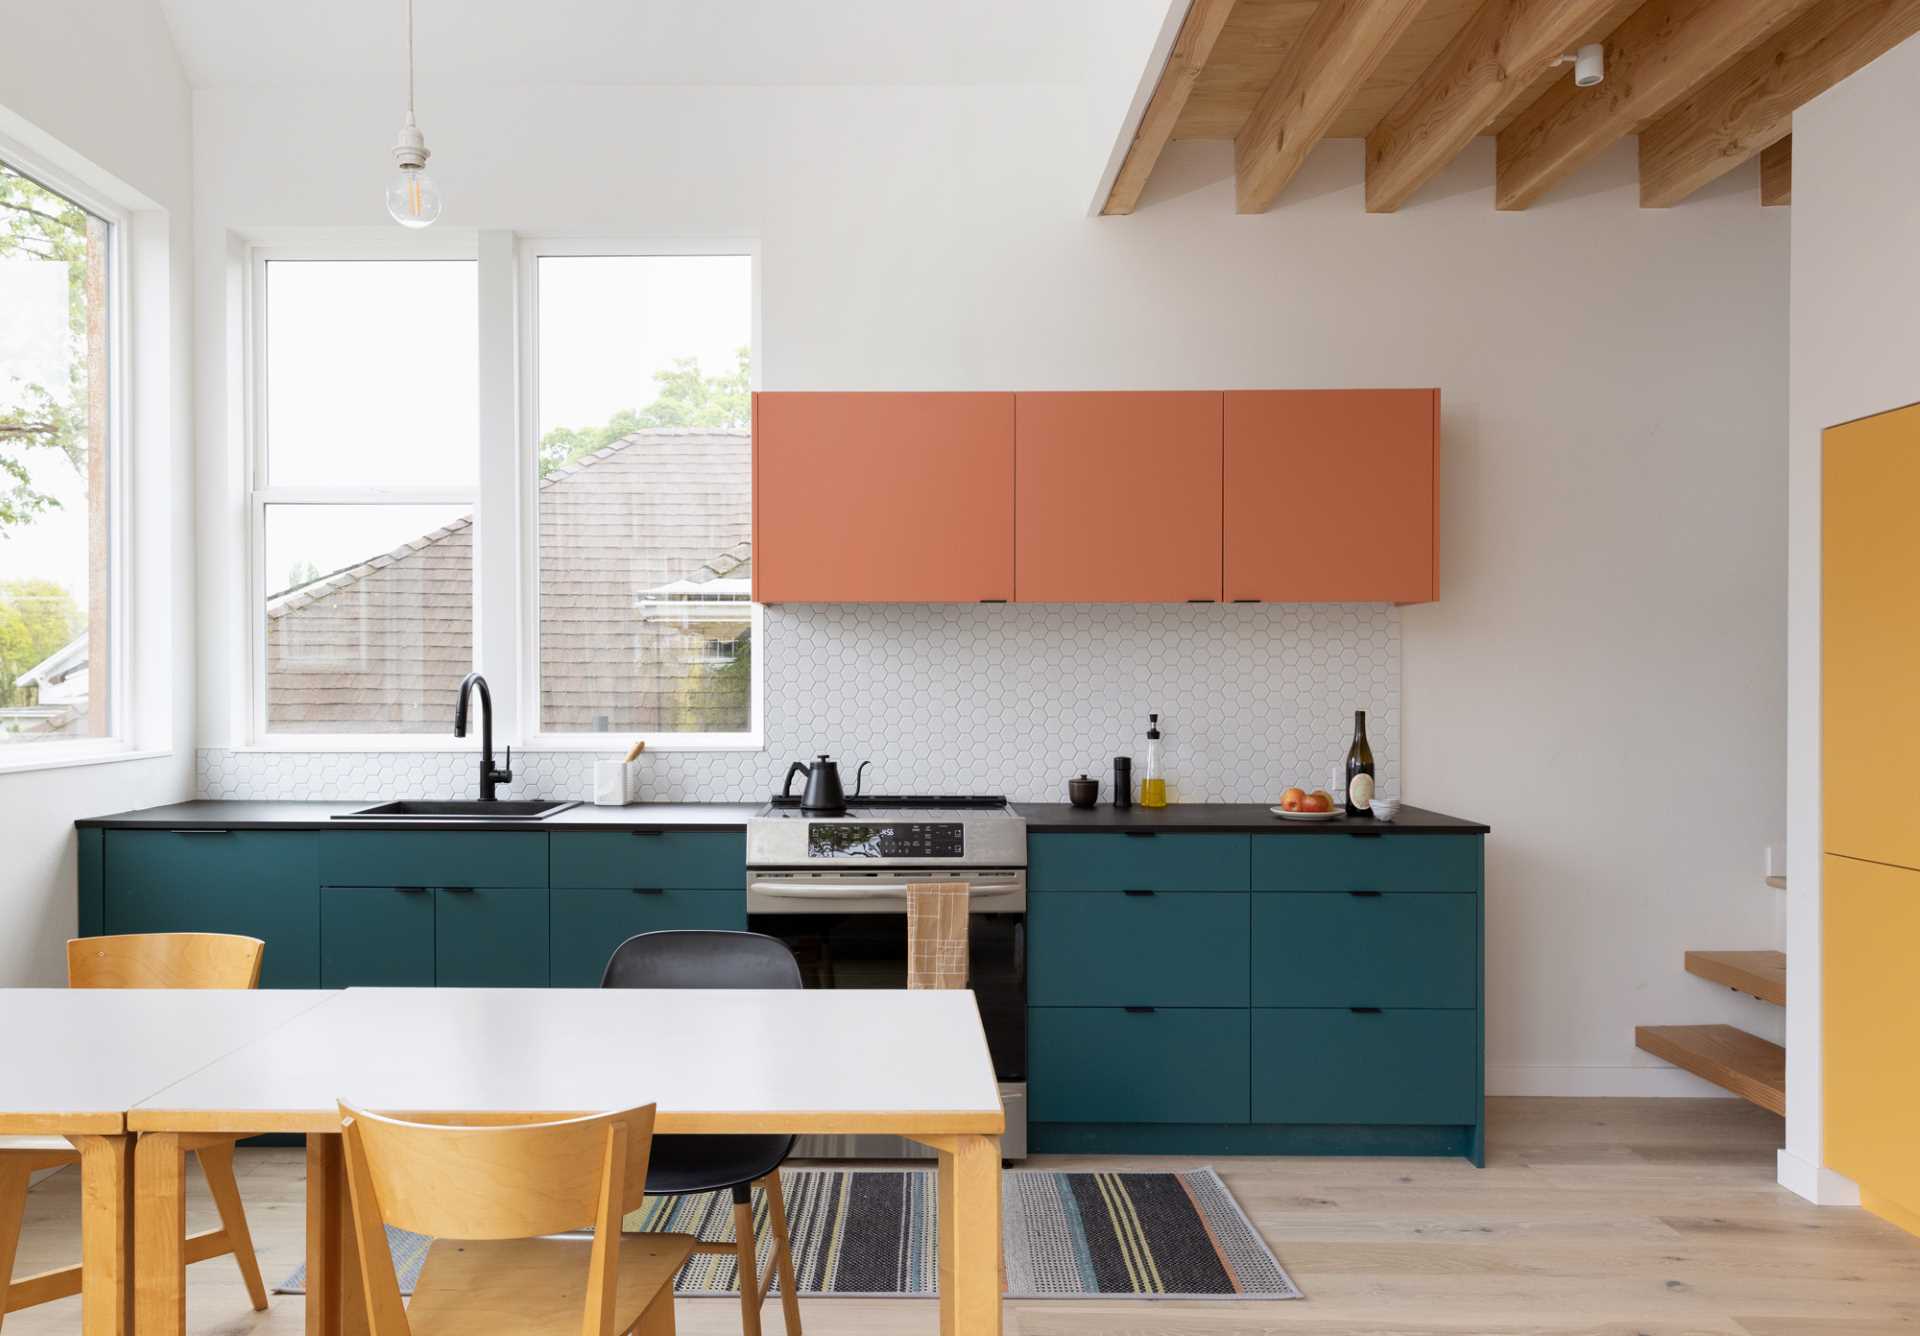 A modern kitchen with colorful cabinets.